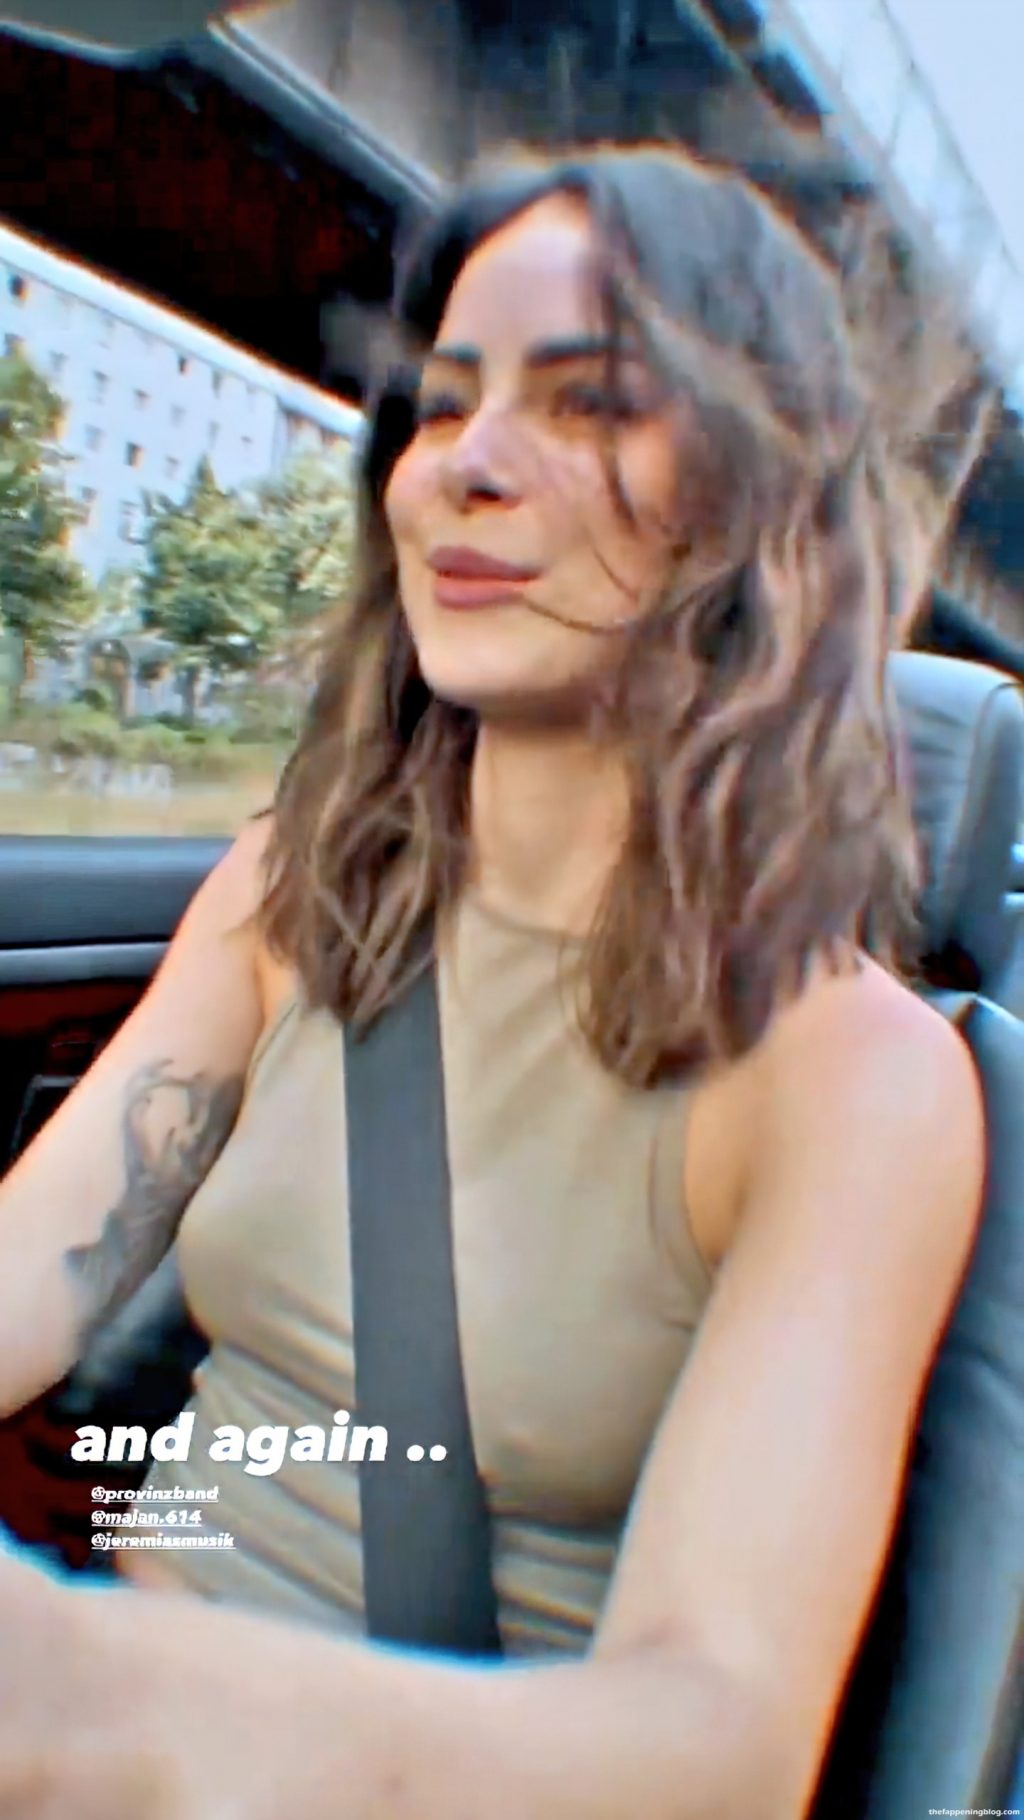 Lena Meyer-Landrut Shows Her Pokies While Driving (8 Pics + Video)